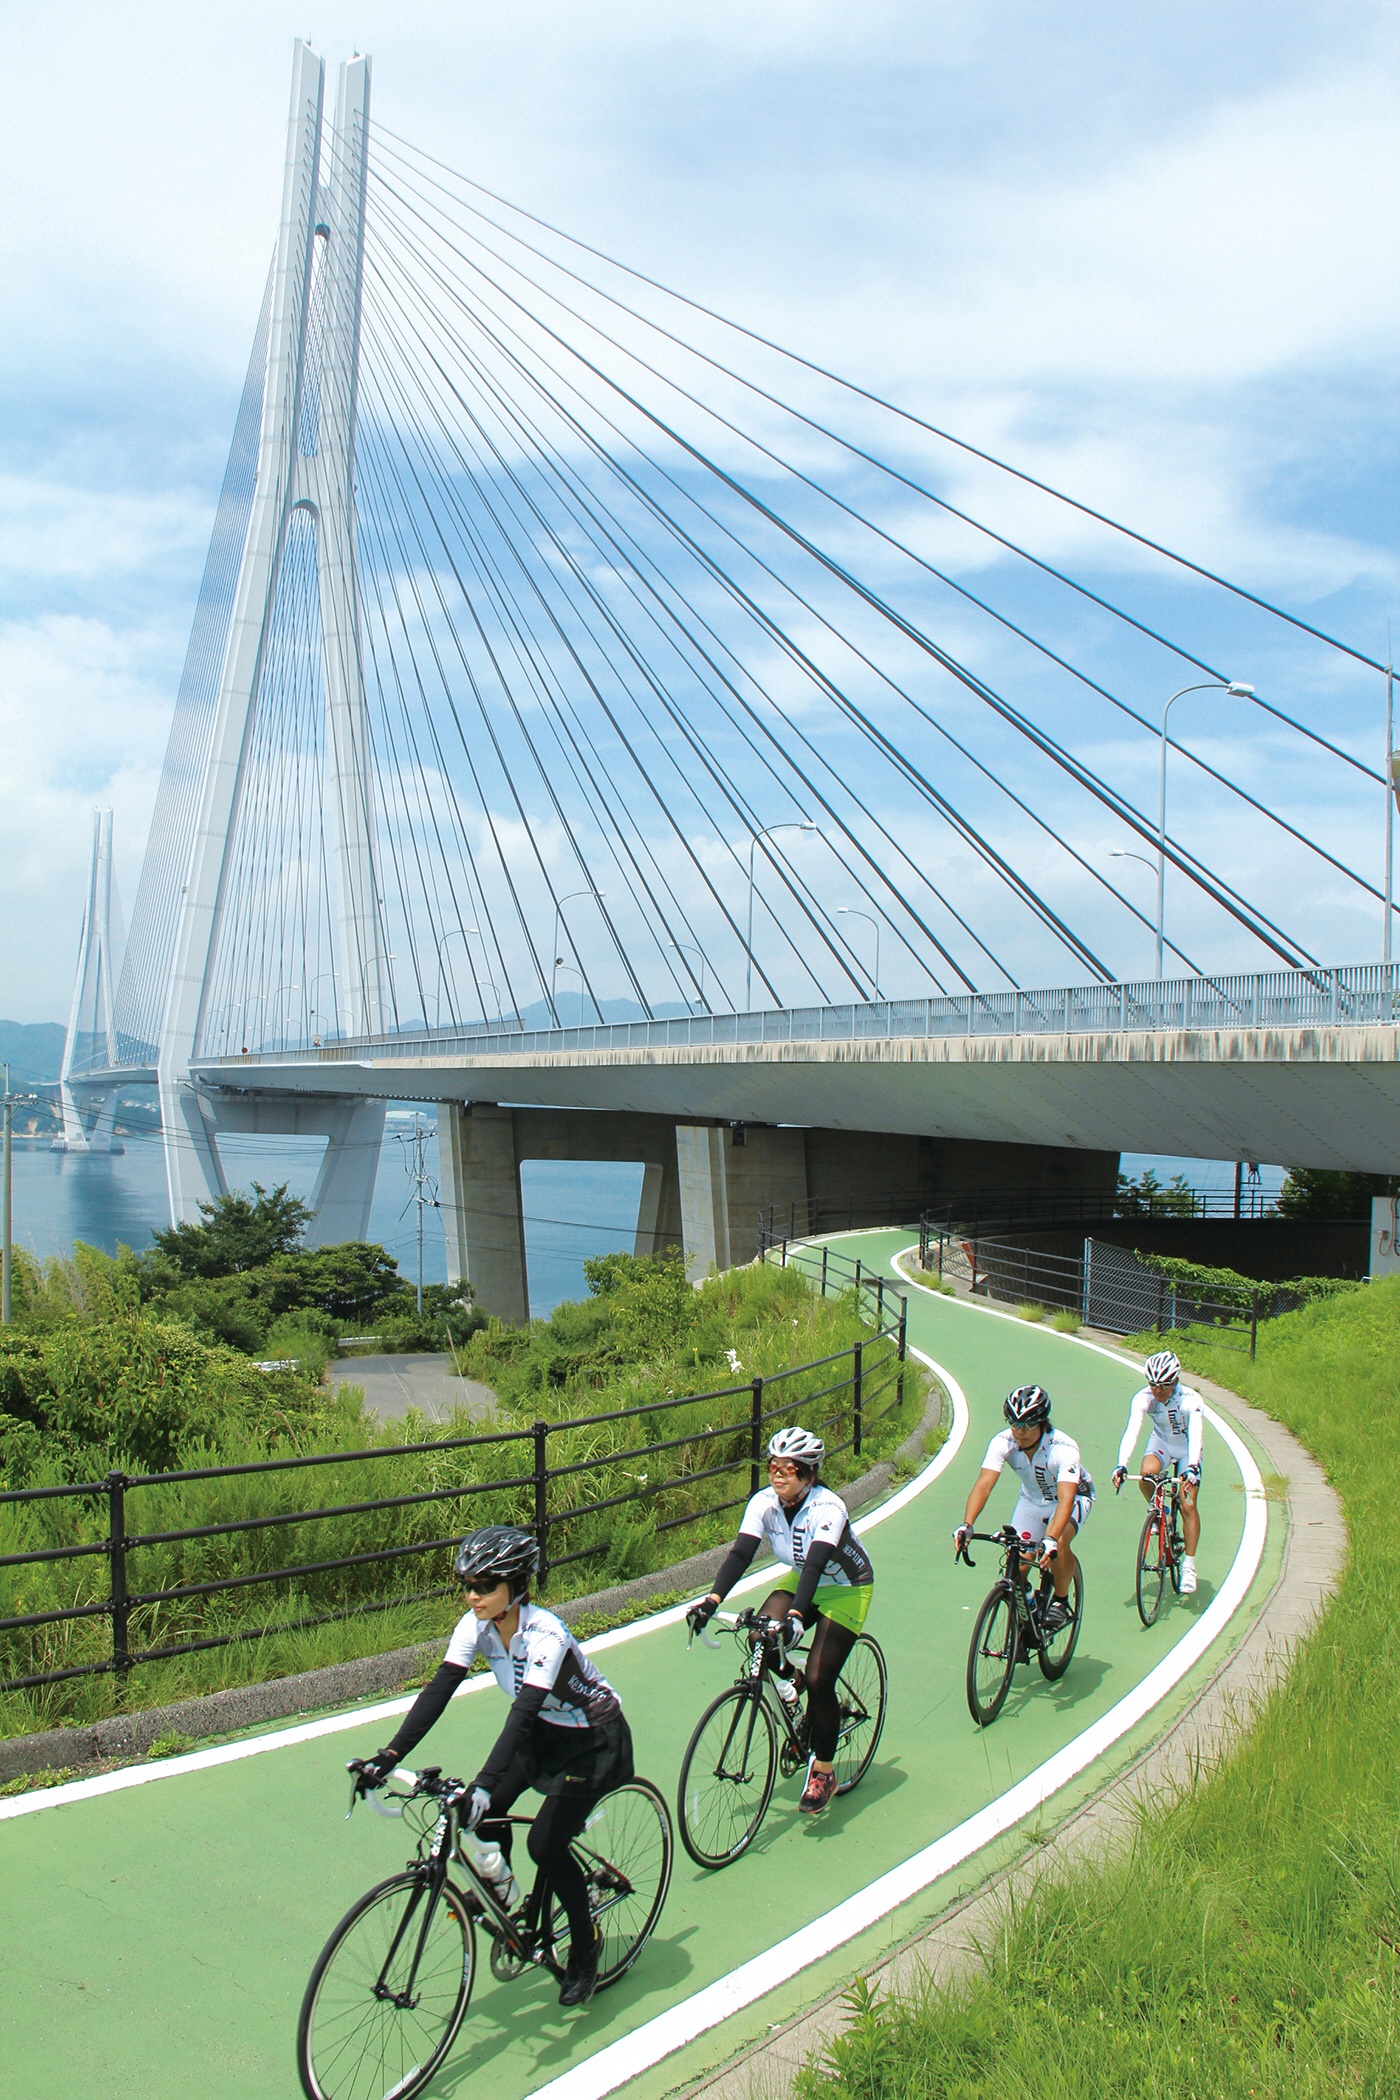 Shimanami Kaido is regarded as being one of the best bike routes in the world.